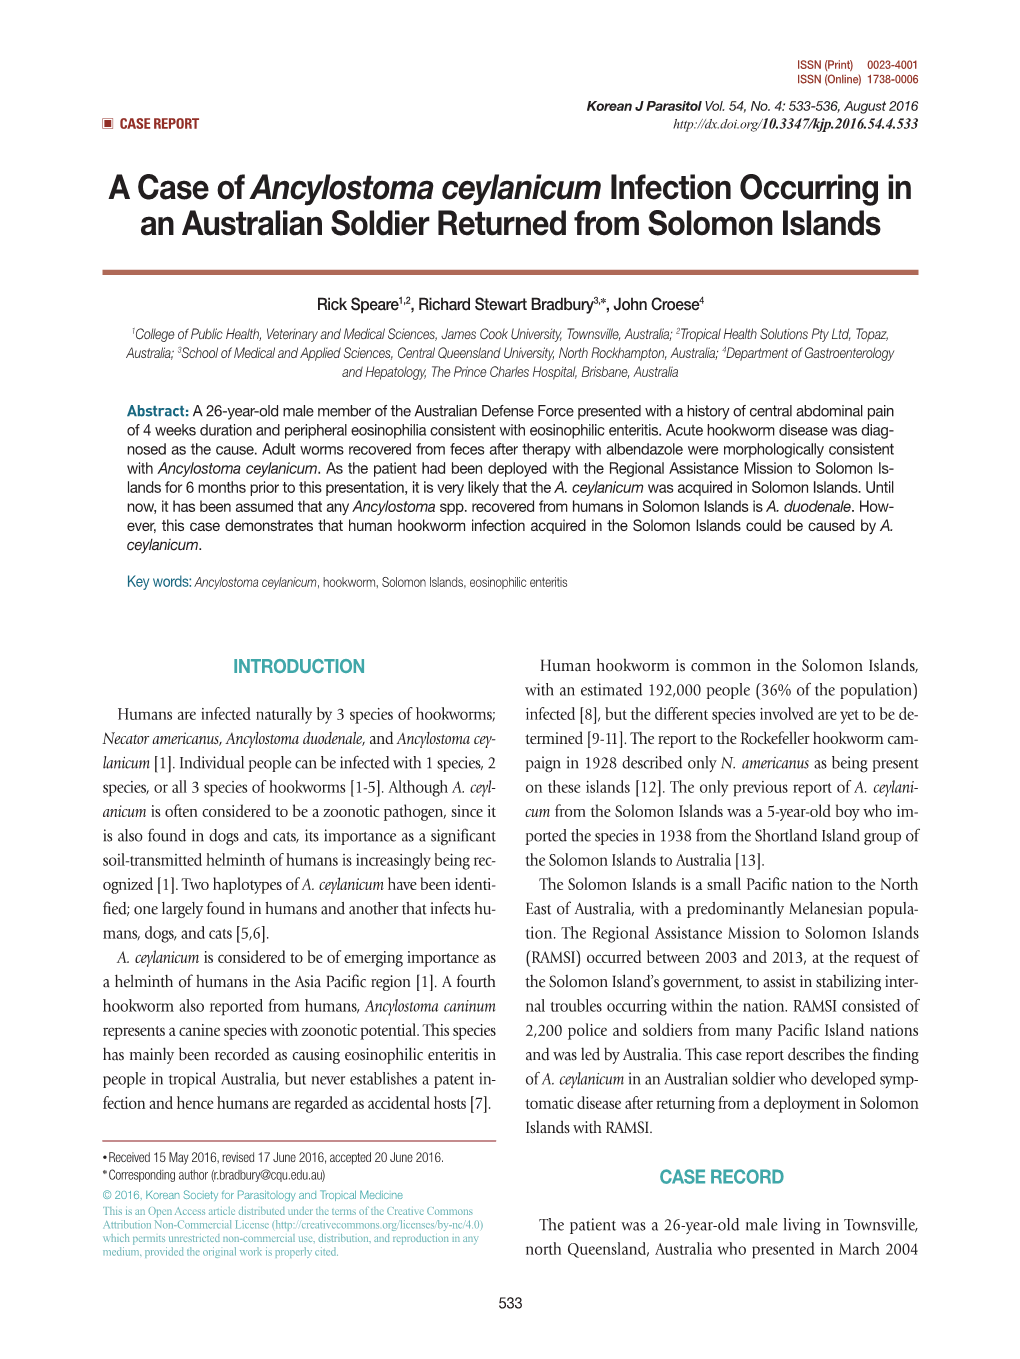 A Case of Ancylostoma Ceylanicum Infection Occurring in an Australian Soldier Returned from Solomon Islands